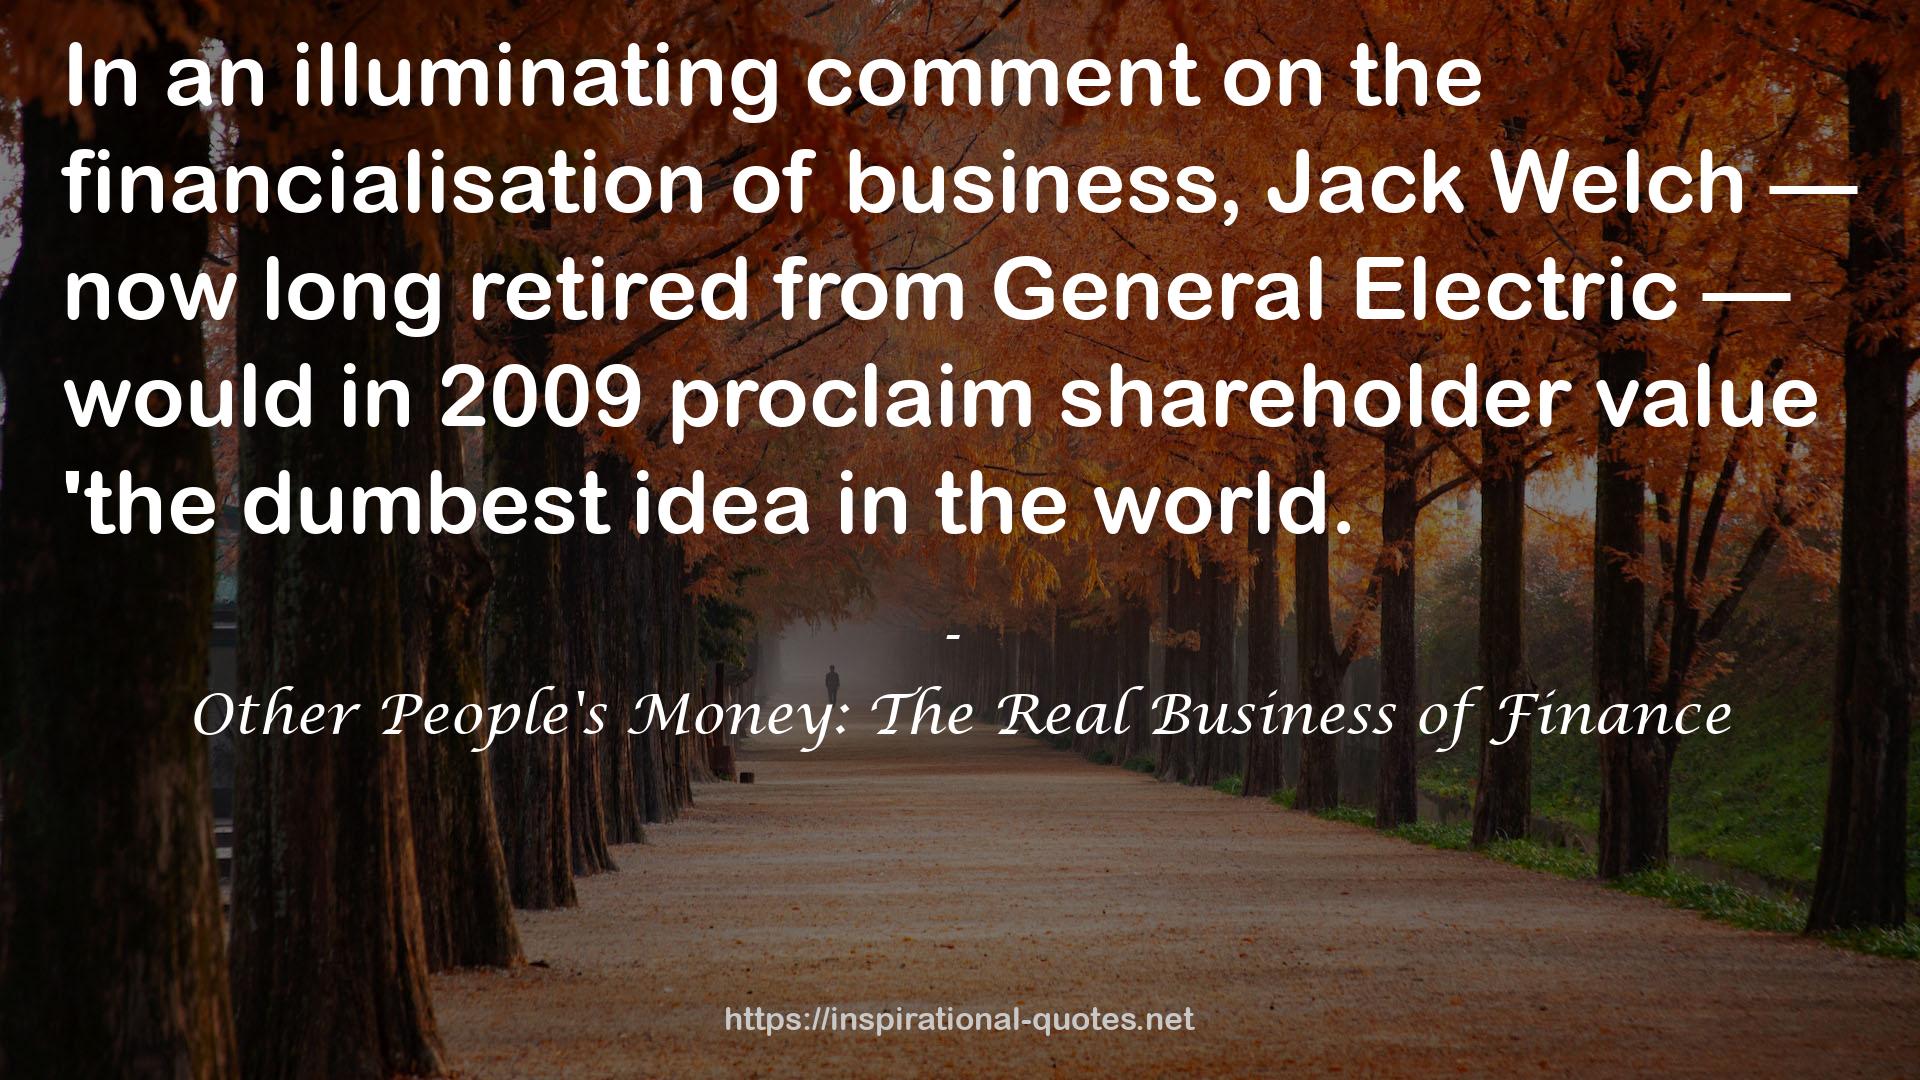 Other People's Money: The Real Business of Finance QUOTES